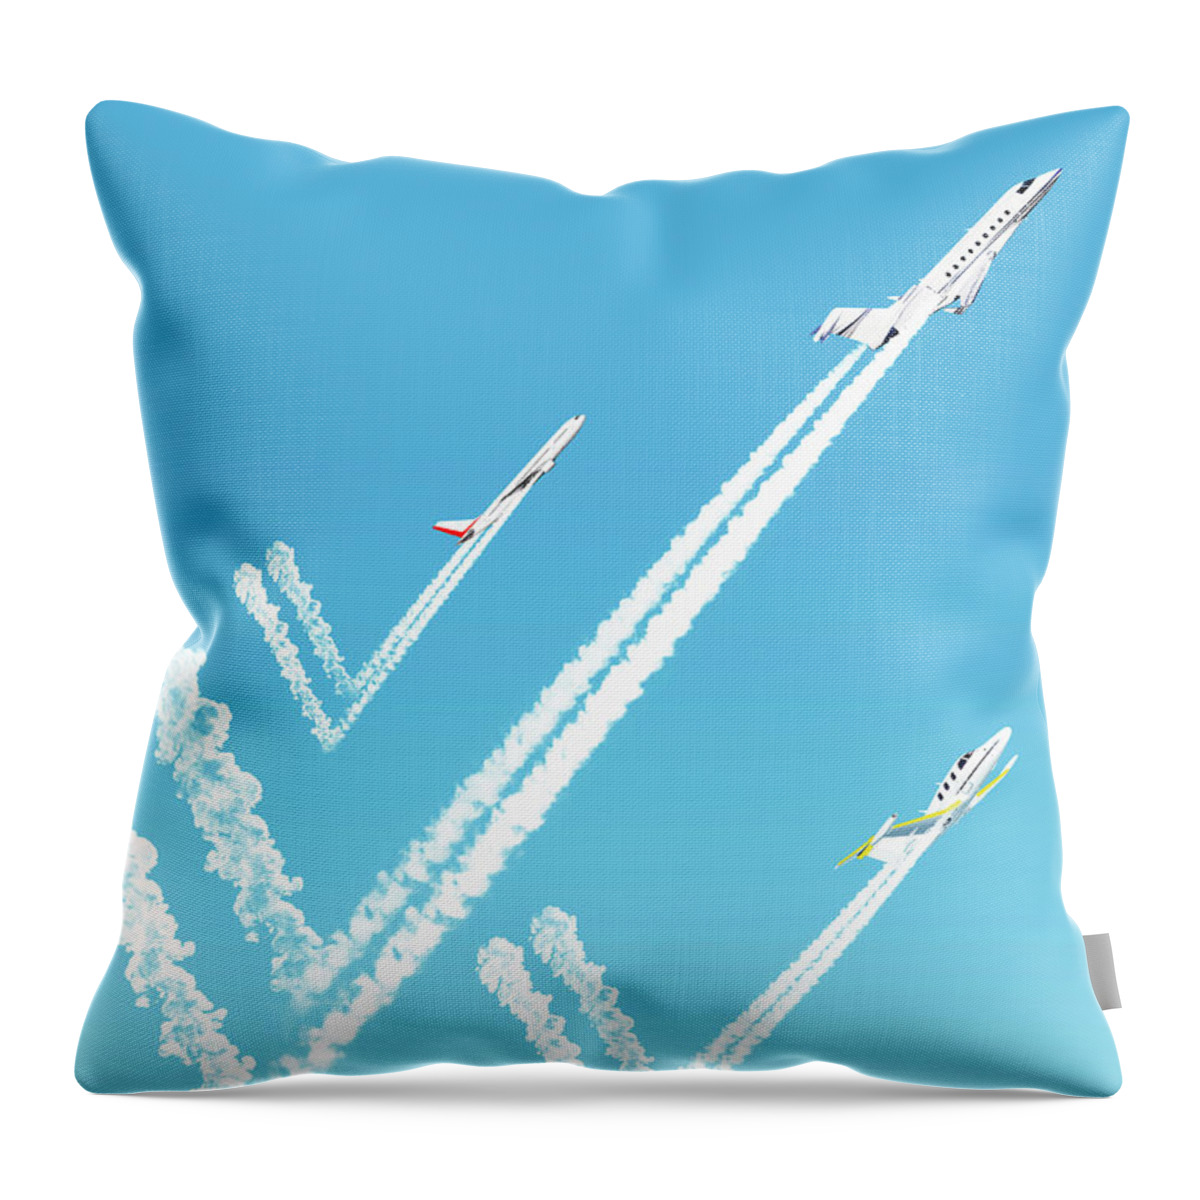 Aerospace Throw Pillow featuring the photograph Three Airplanes With Tick Mark Vapor by Ikon Images